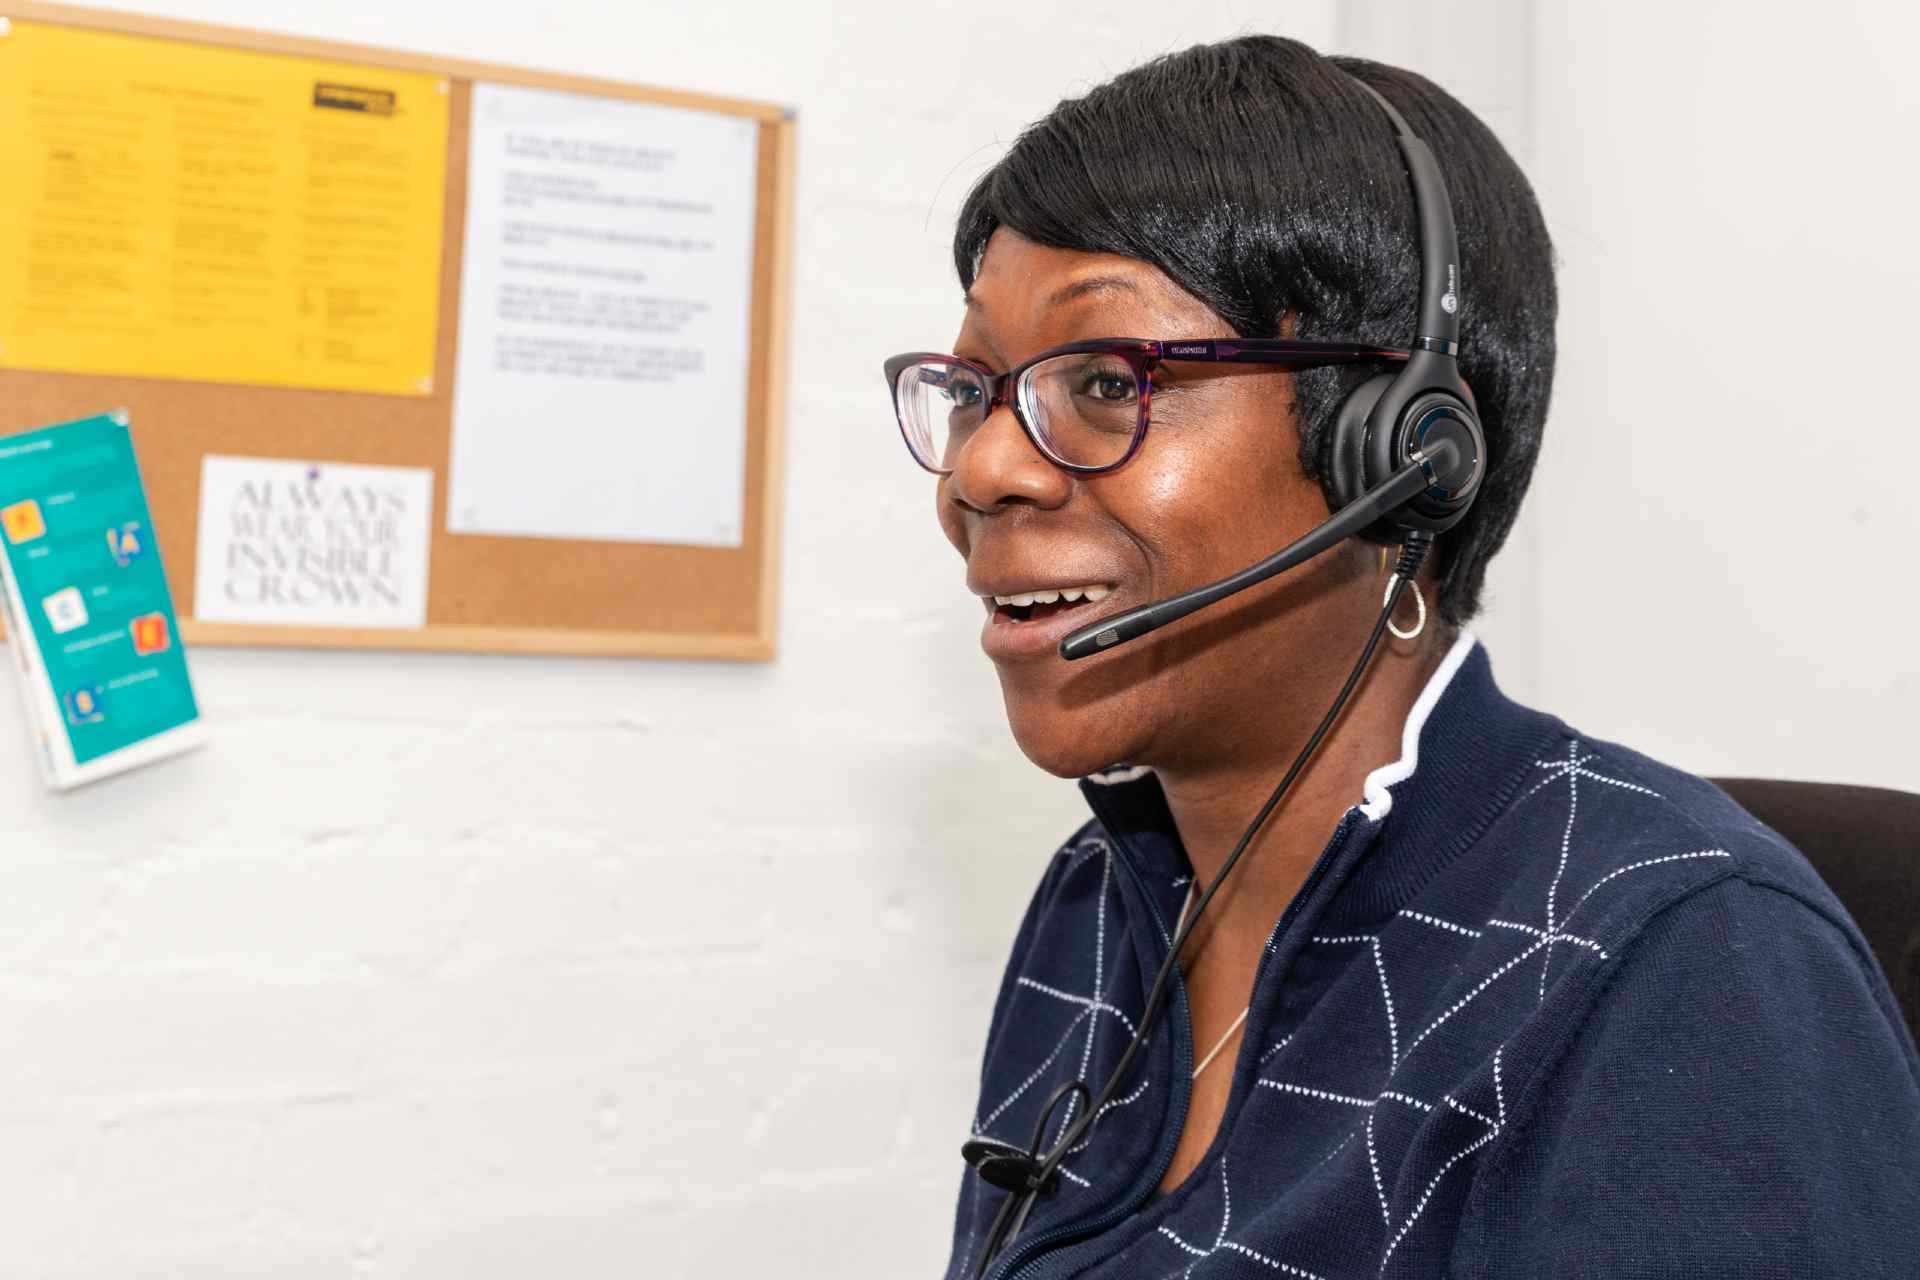 Profile of a woman in an office environment, wearing a headset and smiling